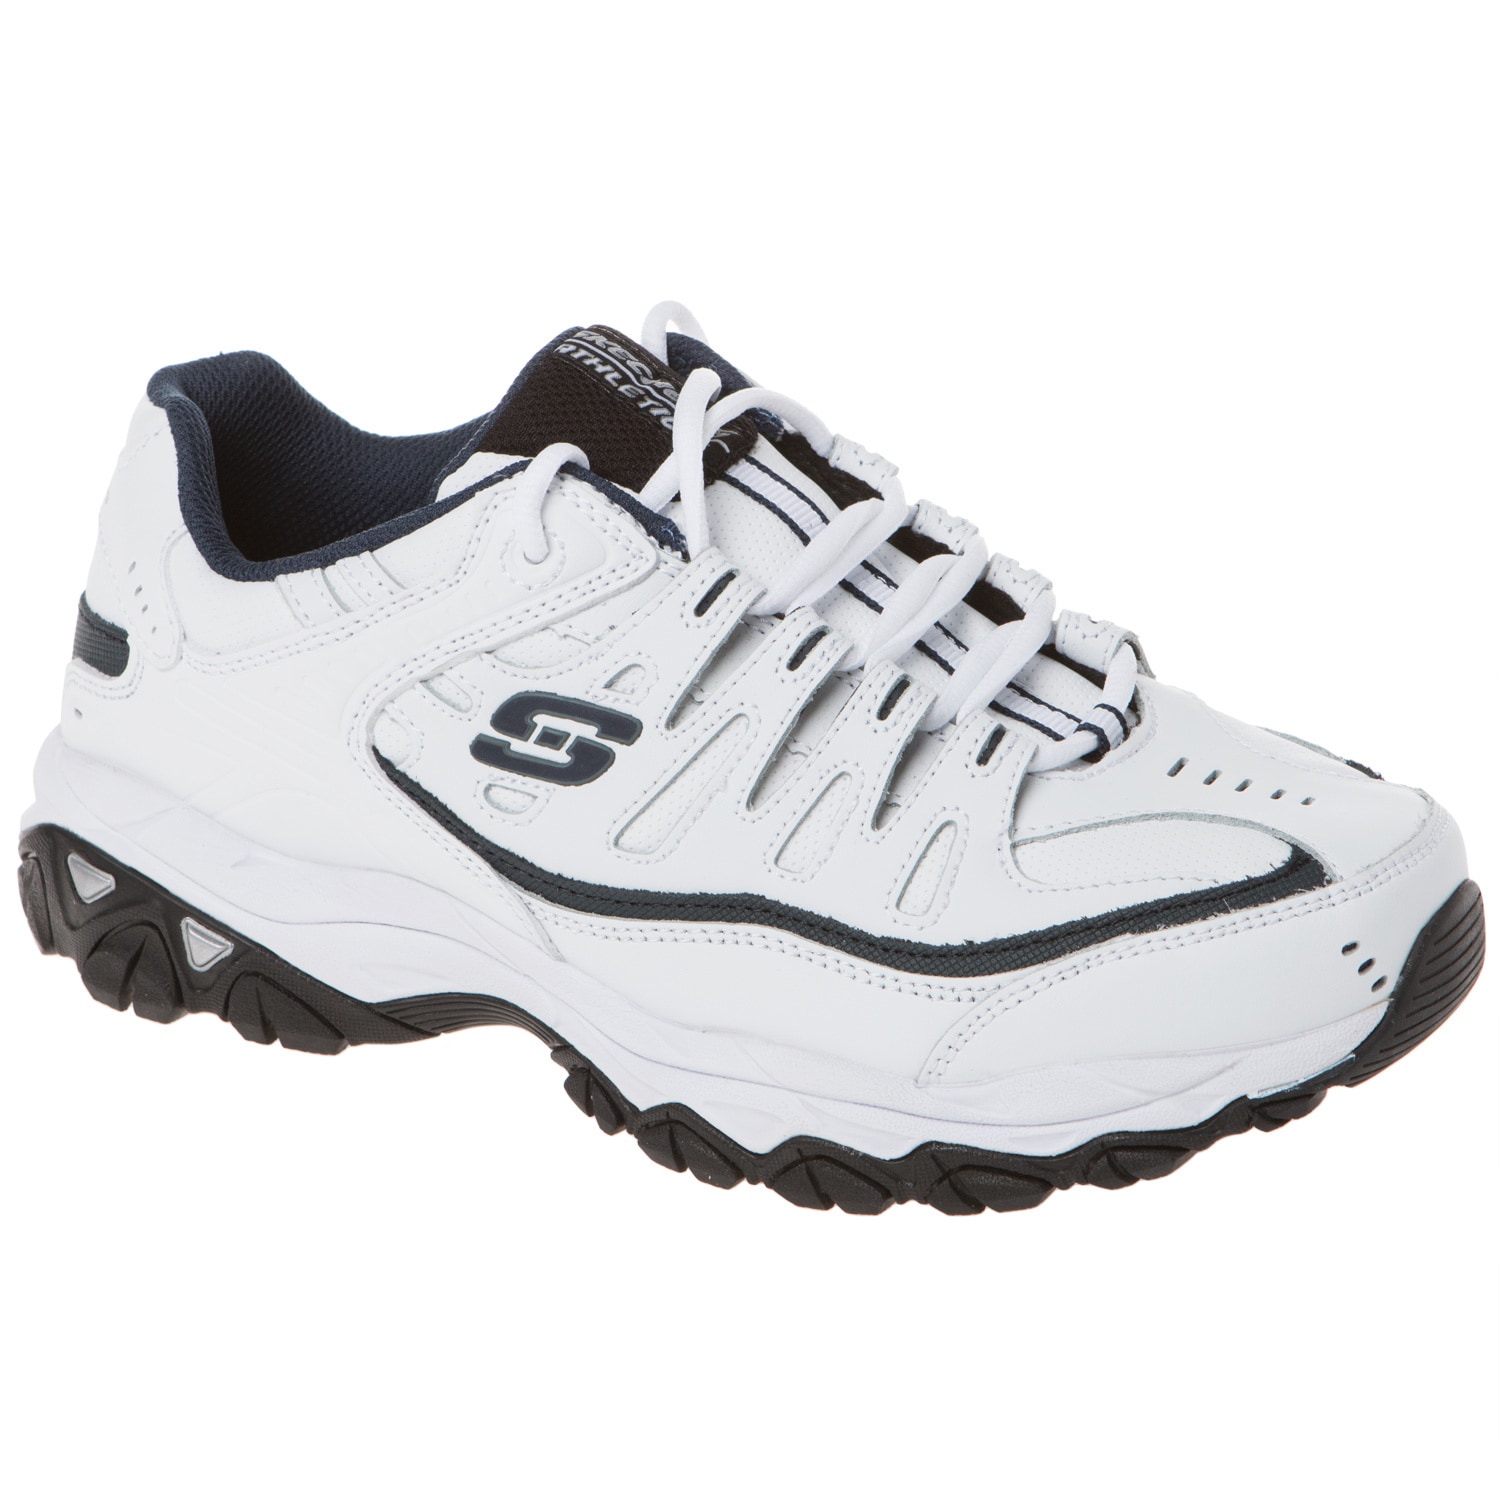 skechers leather tennis shoes